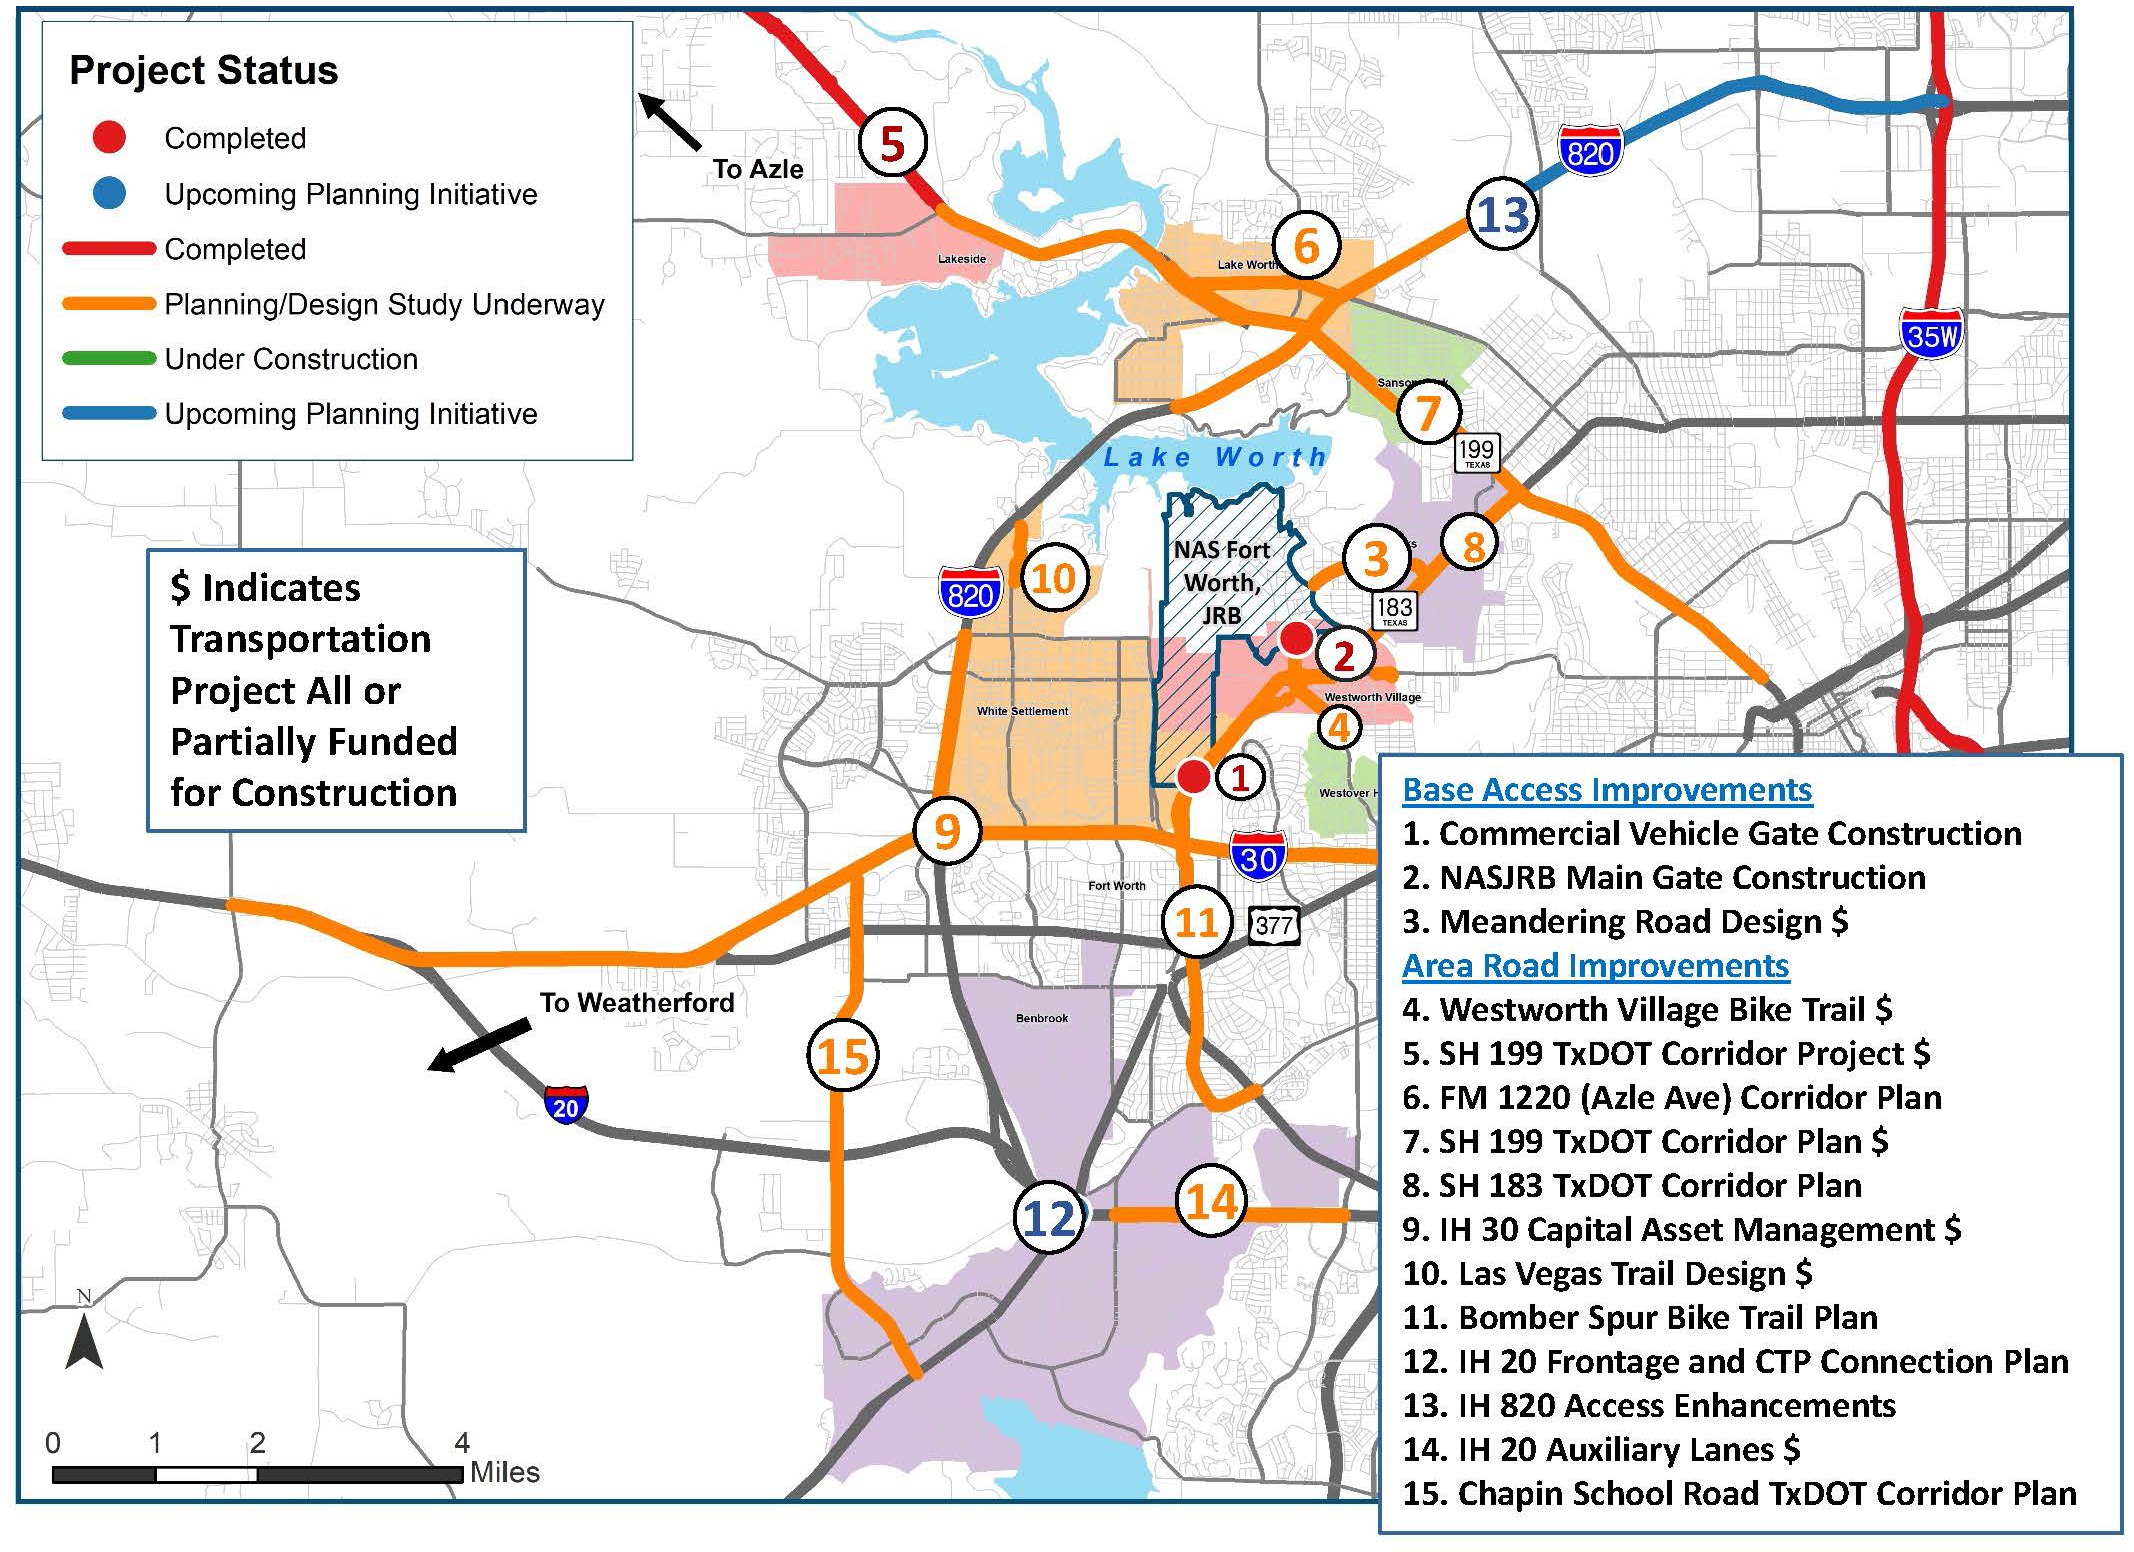 Map showing status of transportation projects surrounding NAS JRB Fort Worth